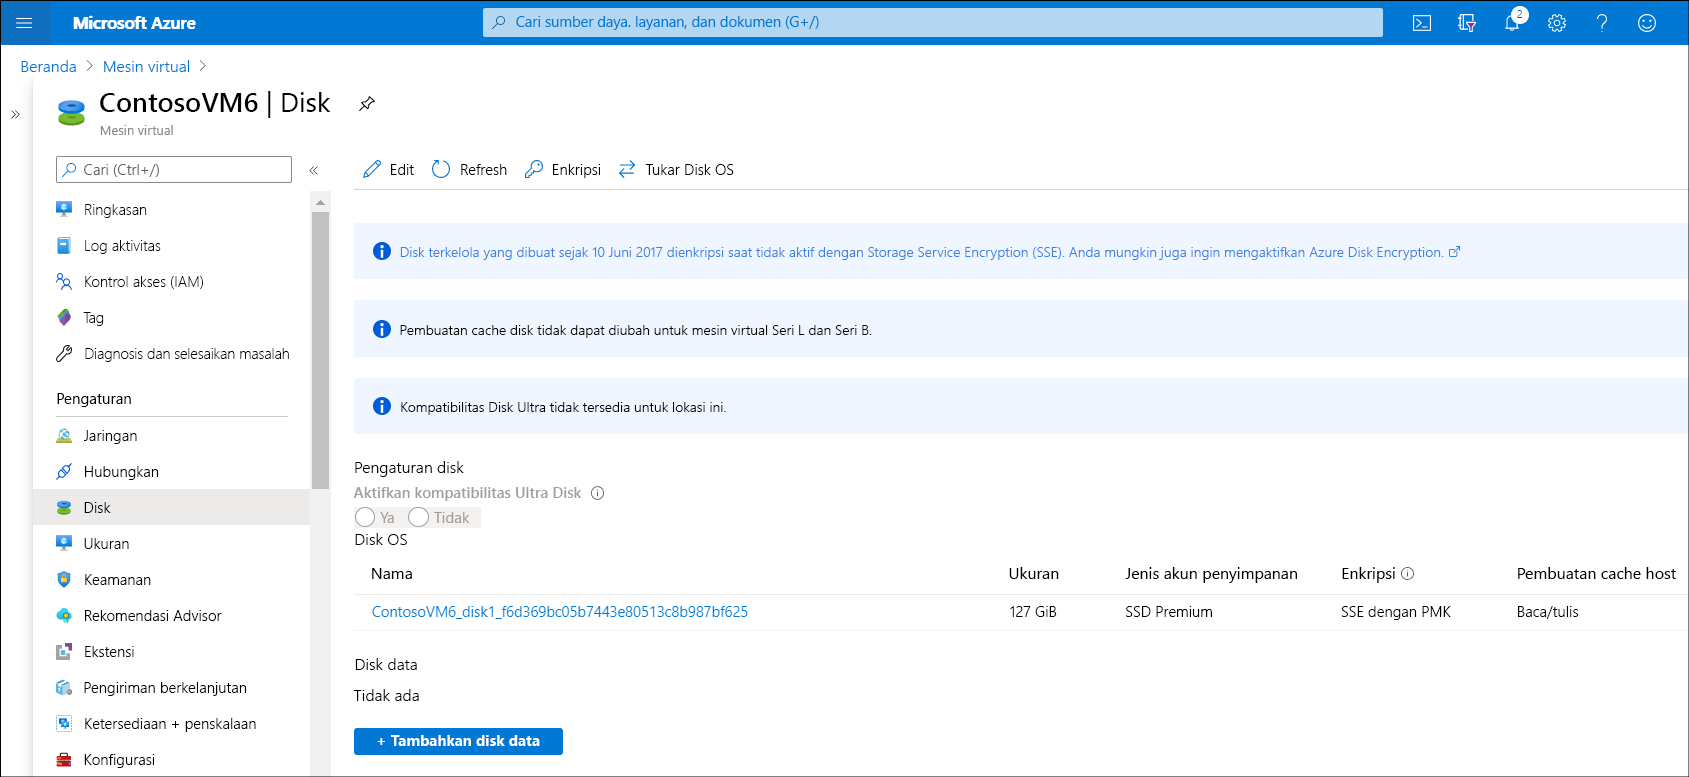 A screenshot of the Disks blade in the Azure portal for a VM named ContosoVM6.